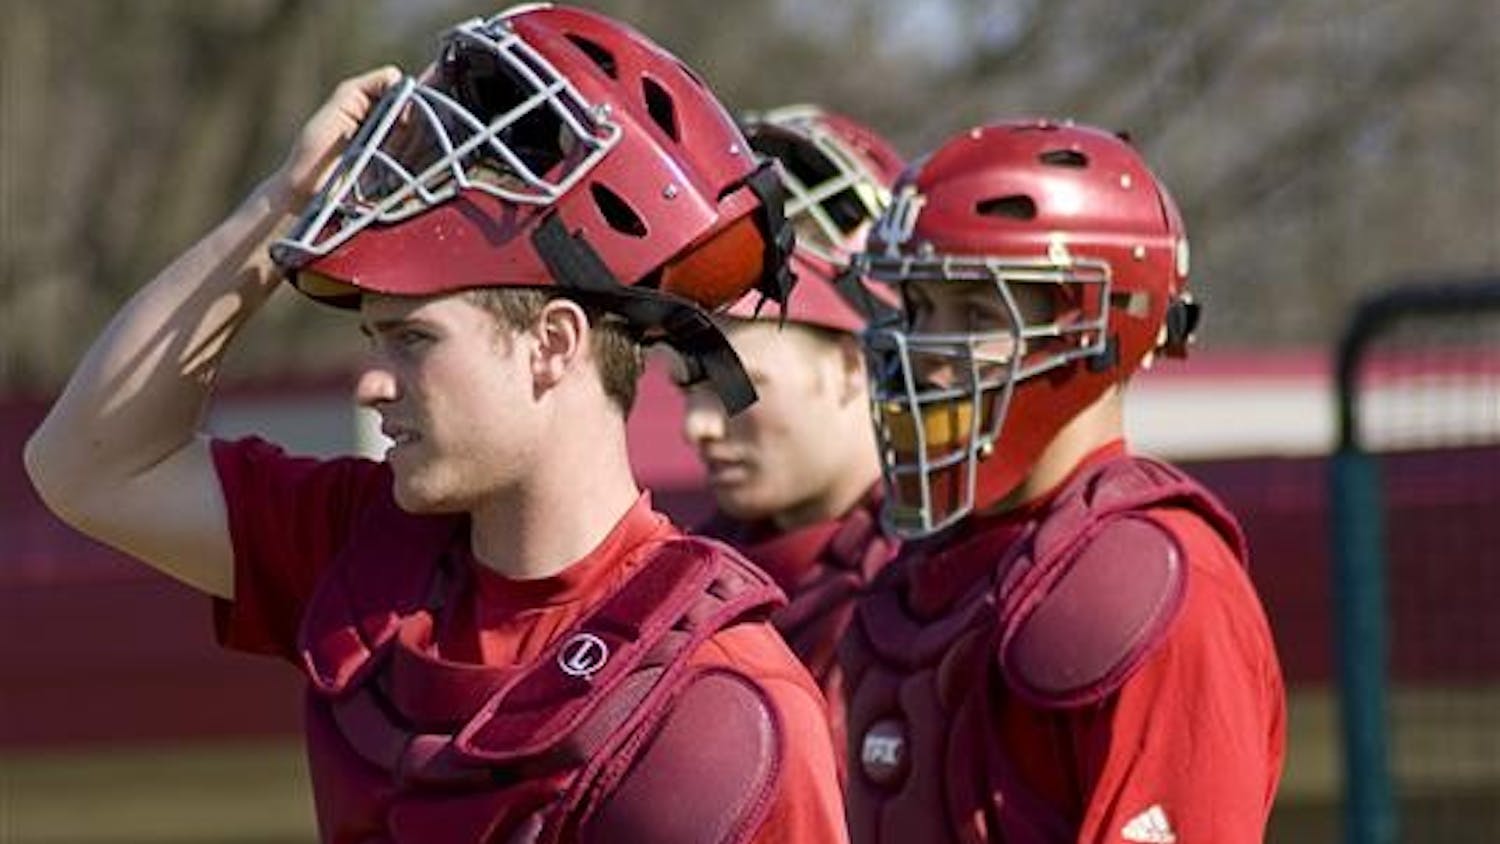 Sophomore catcher Dylan Swift watches during practice Thursday afternoon at Sembower Field. The Hoosiers face Chicago State Tuesday at 3 p.m. at home